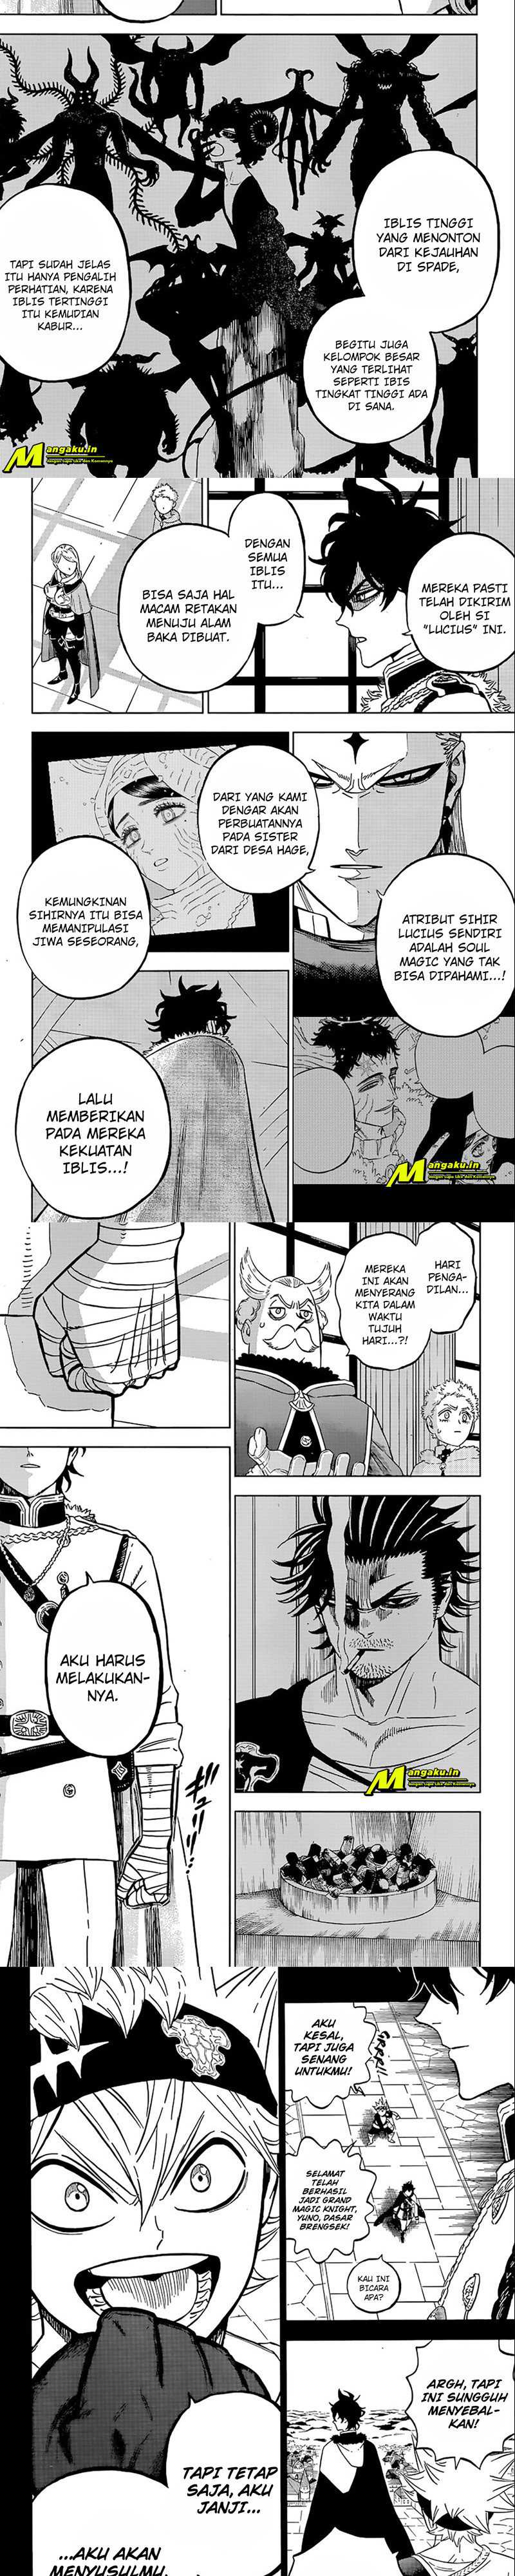 Black Clover Chapter 336 Bahasa Indonesia